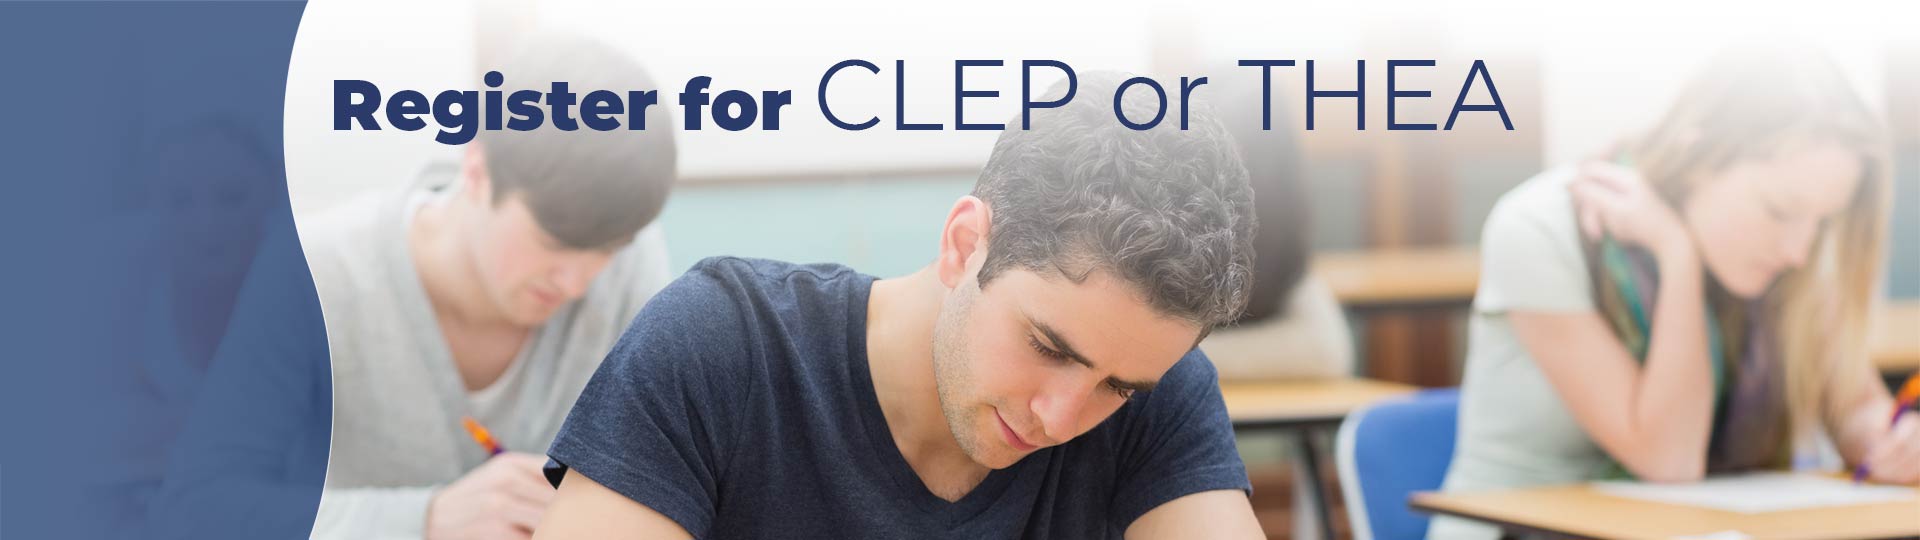 Register for CLEP or THEA